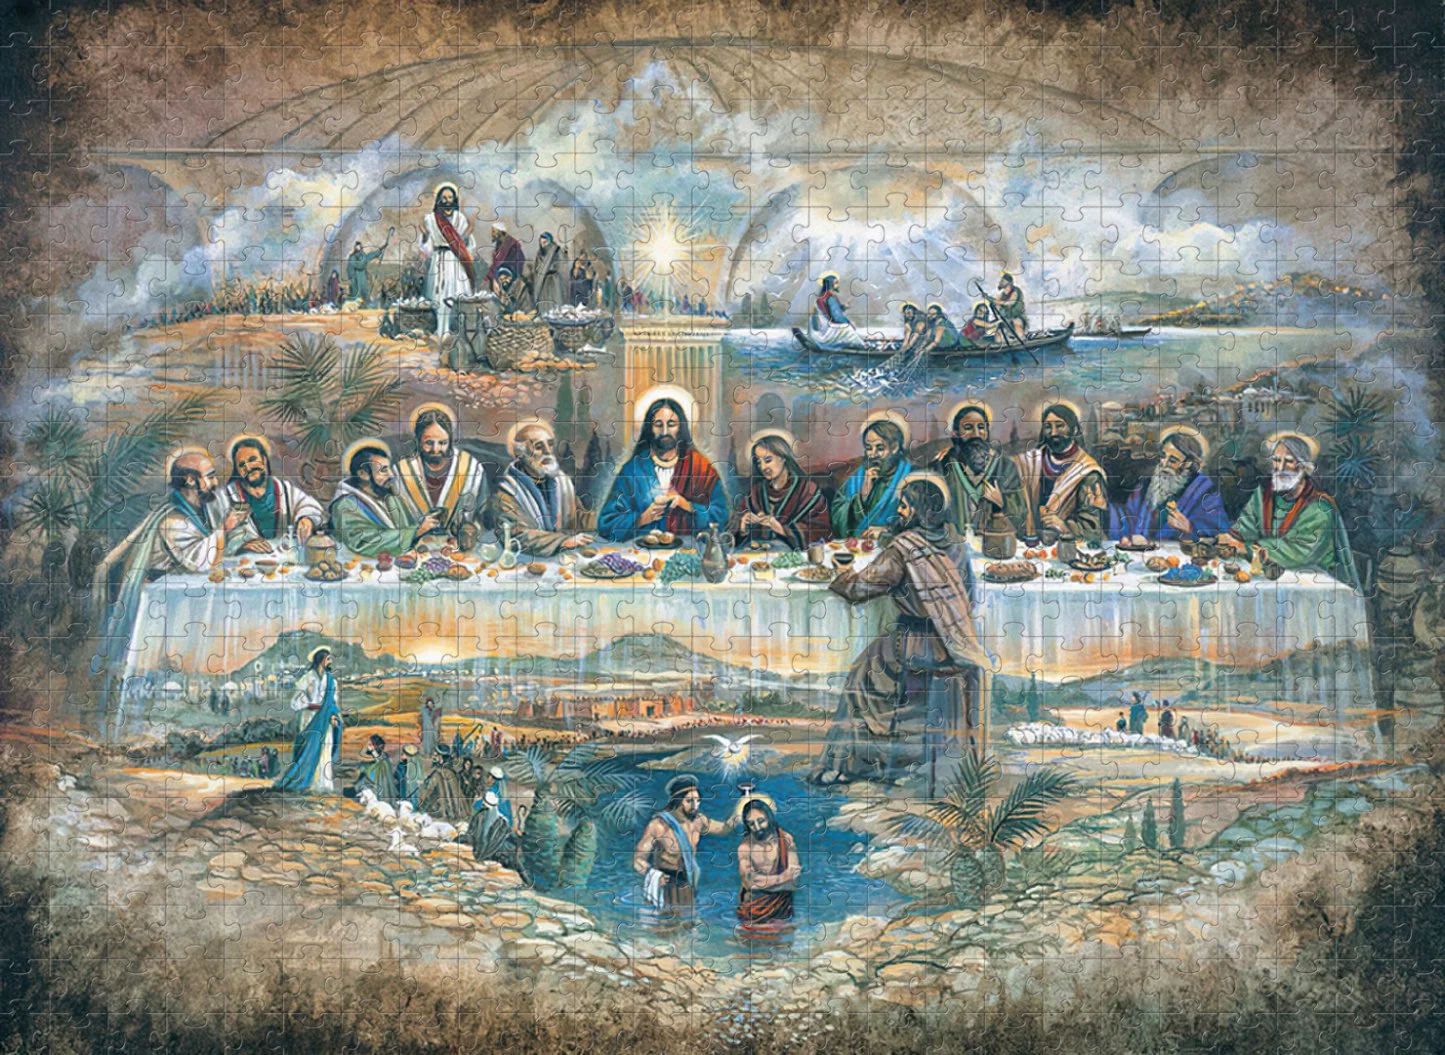 Oil Painting of The Last Supper Wholesale Intellectual Educational Kids Toys, Wooden 1000 Piece Jigsaw Puzzle Gifts Toy, Customisable Patterns and Sizes.